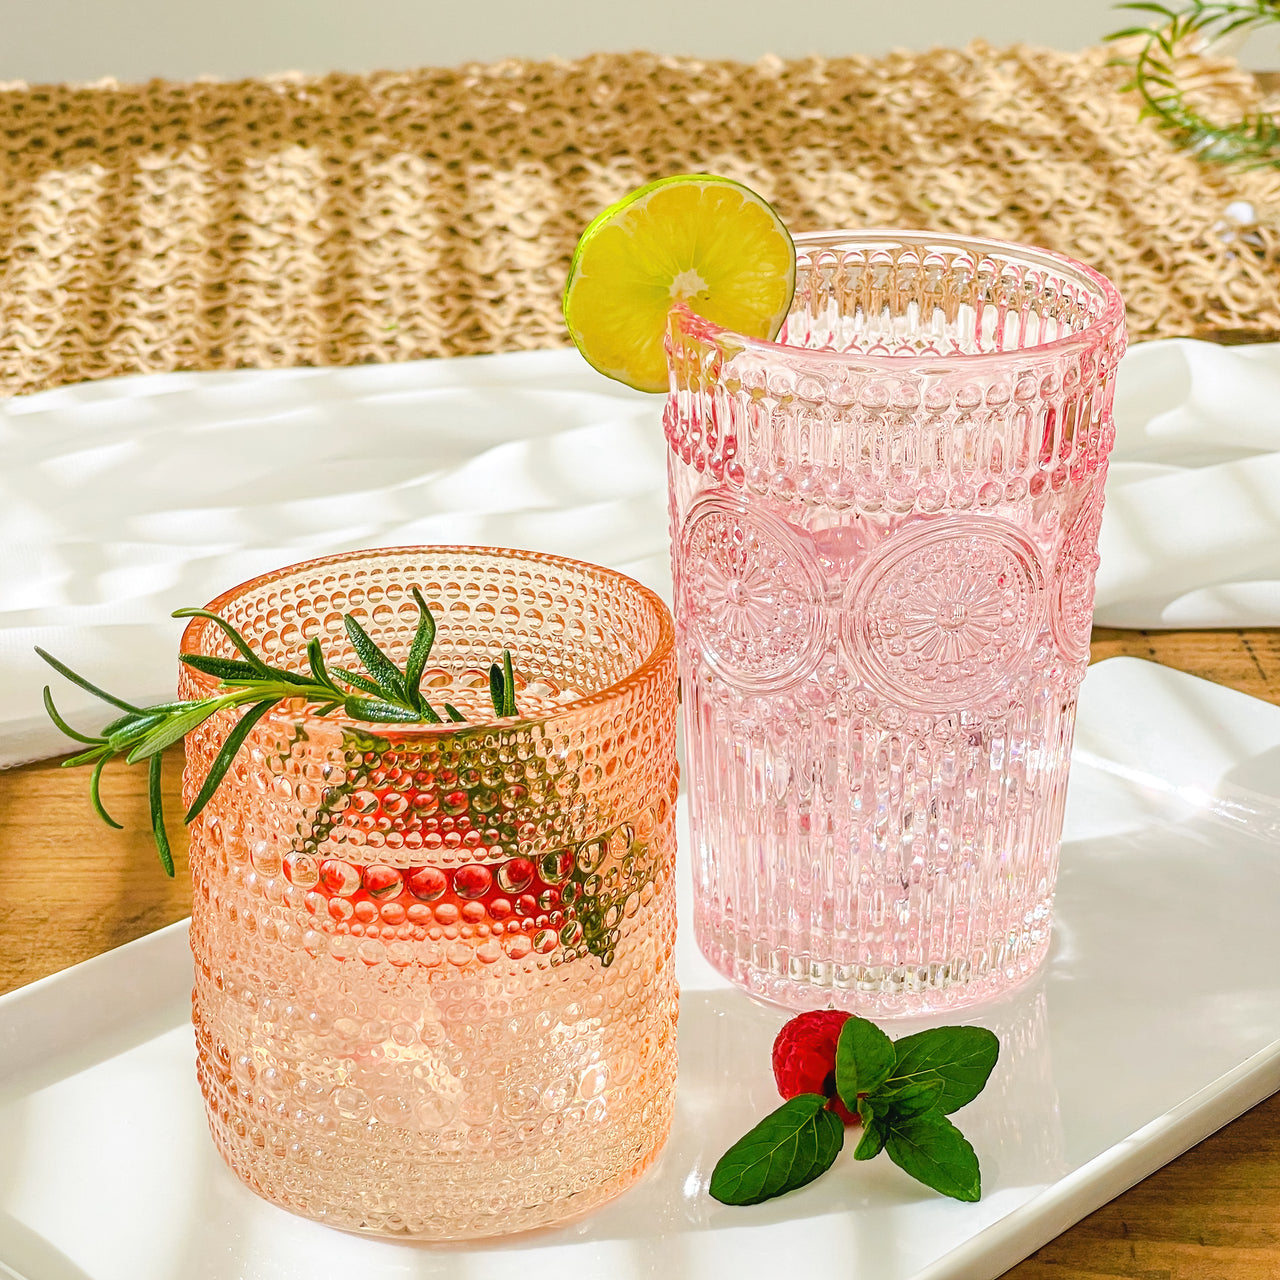 10 oz. Textured Beaded Rose Gold Old Fashion Drinking Glasses (Set of 6)